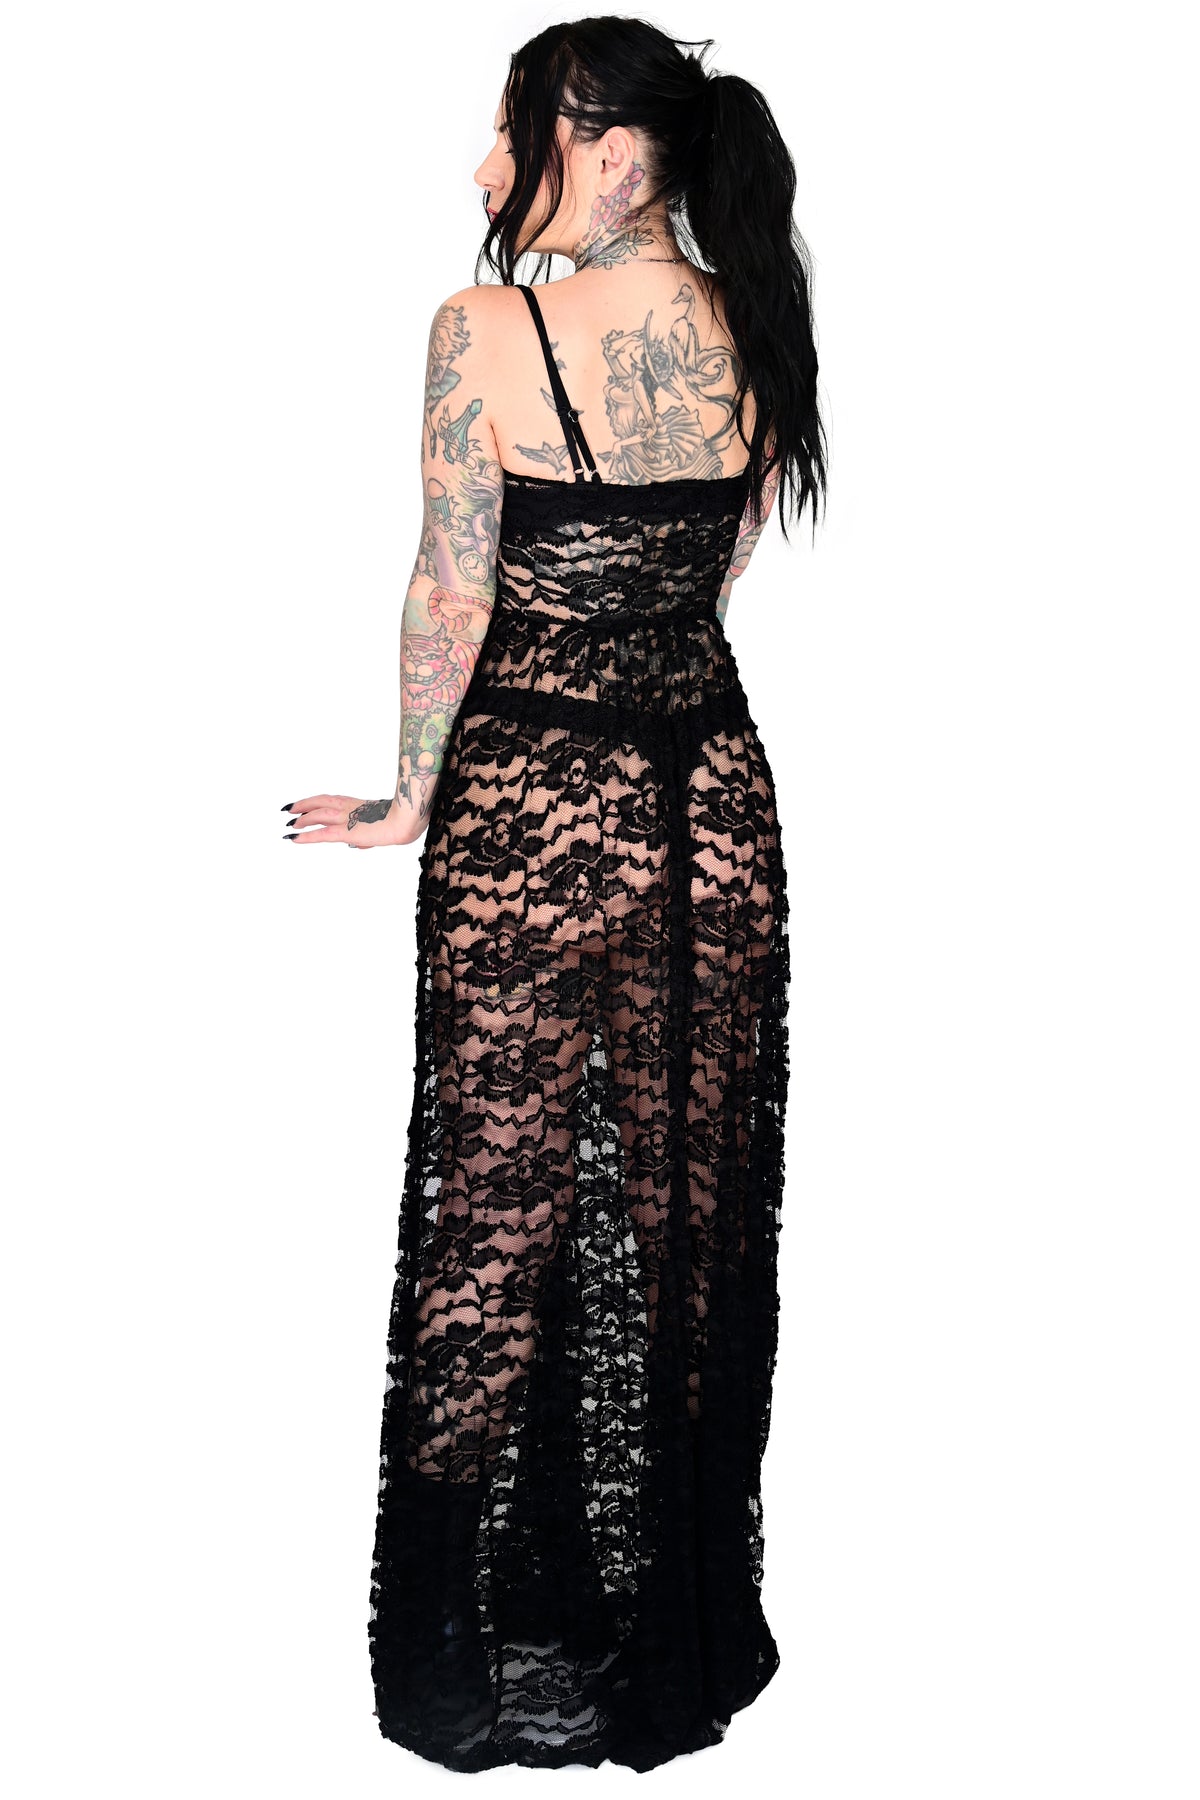 sheer lace maxi dress with spaghetti straps and side slit